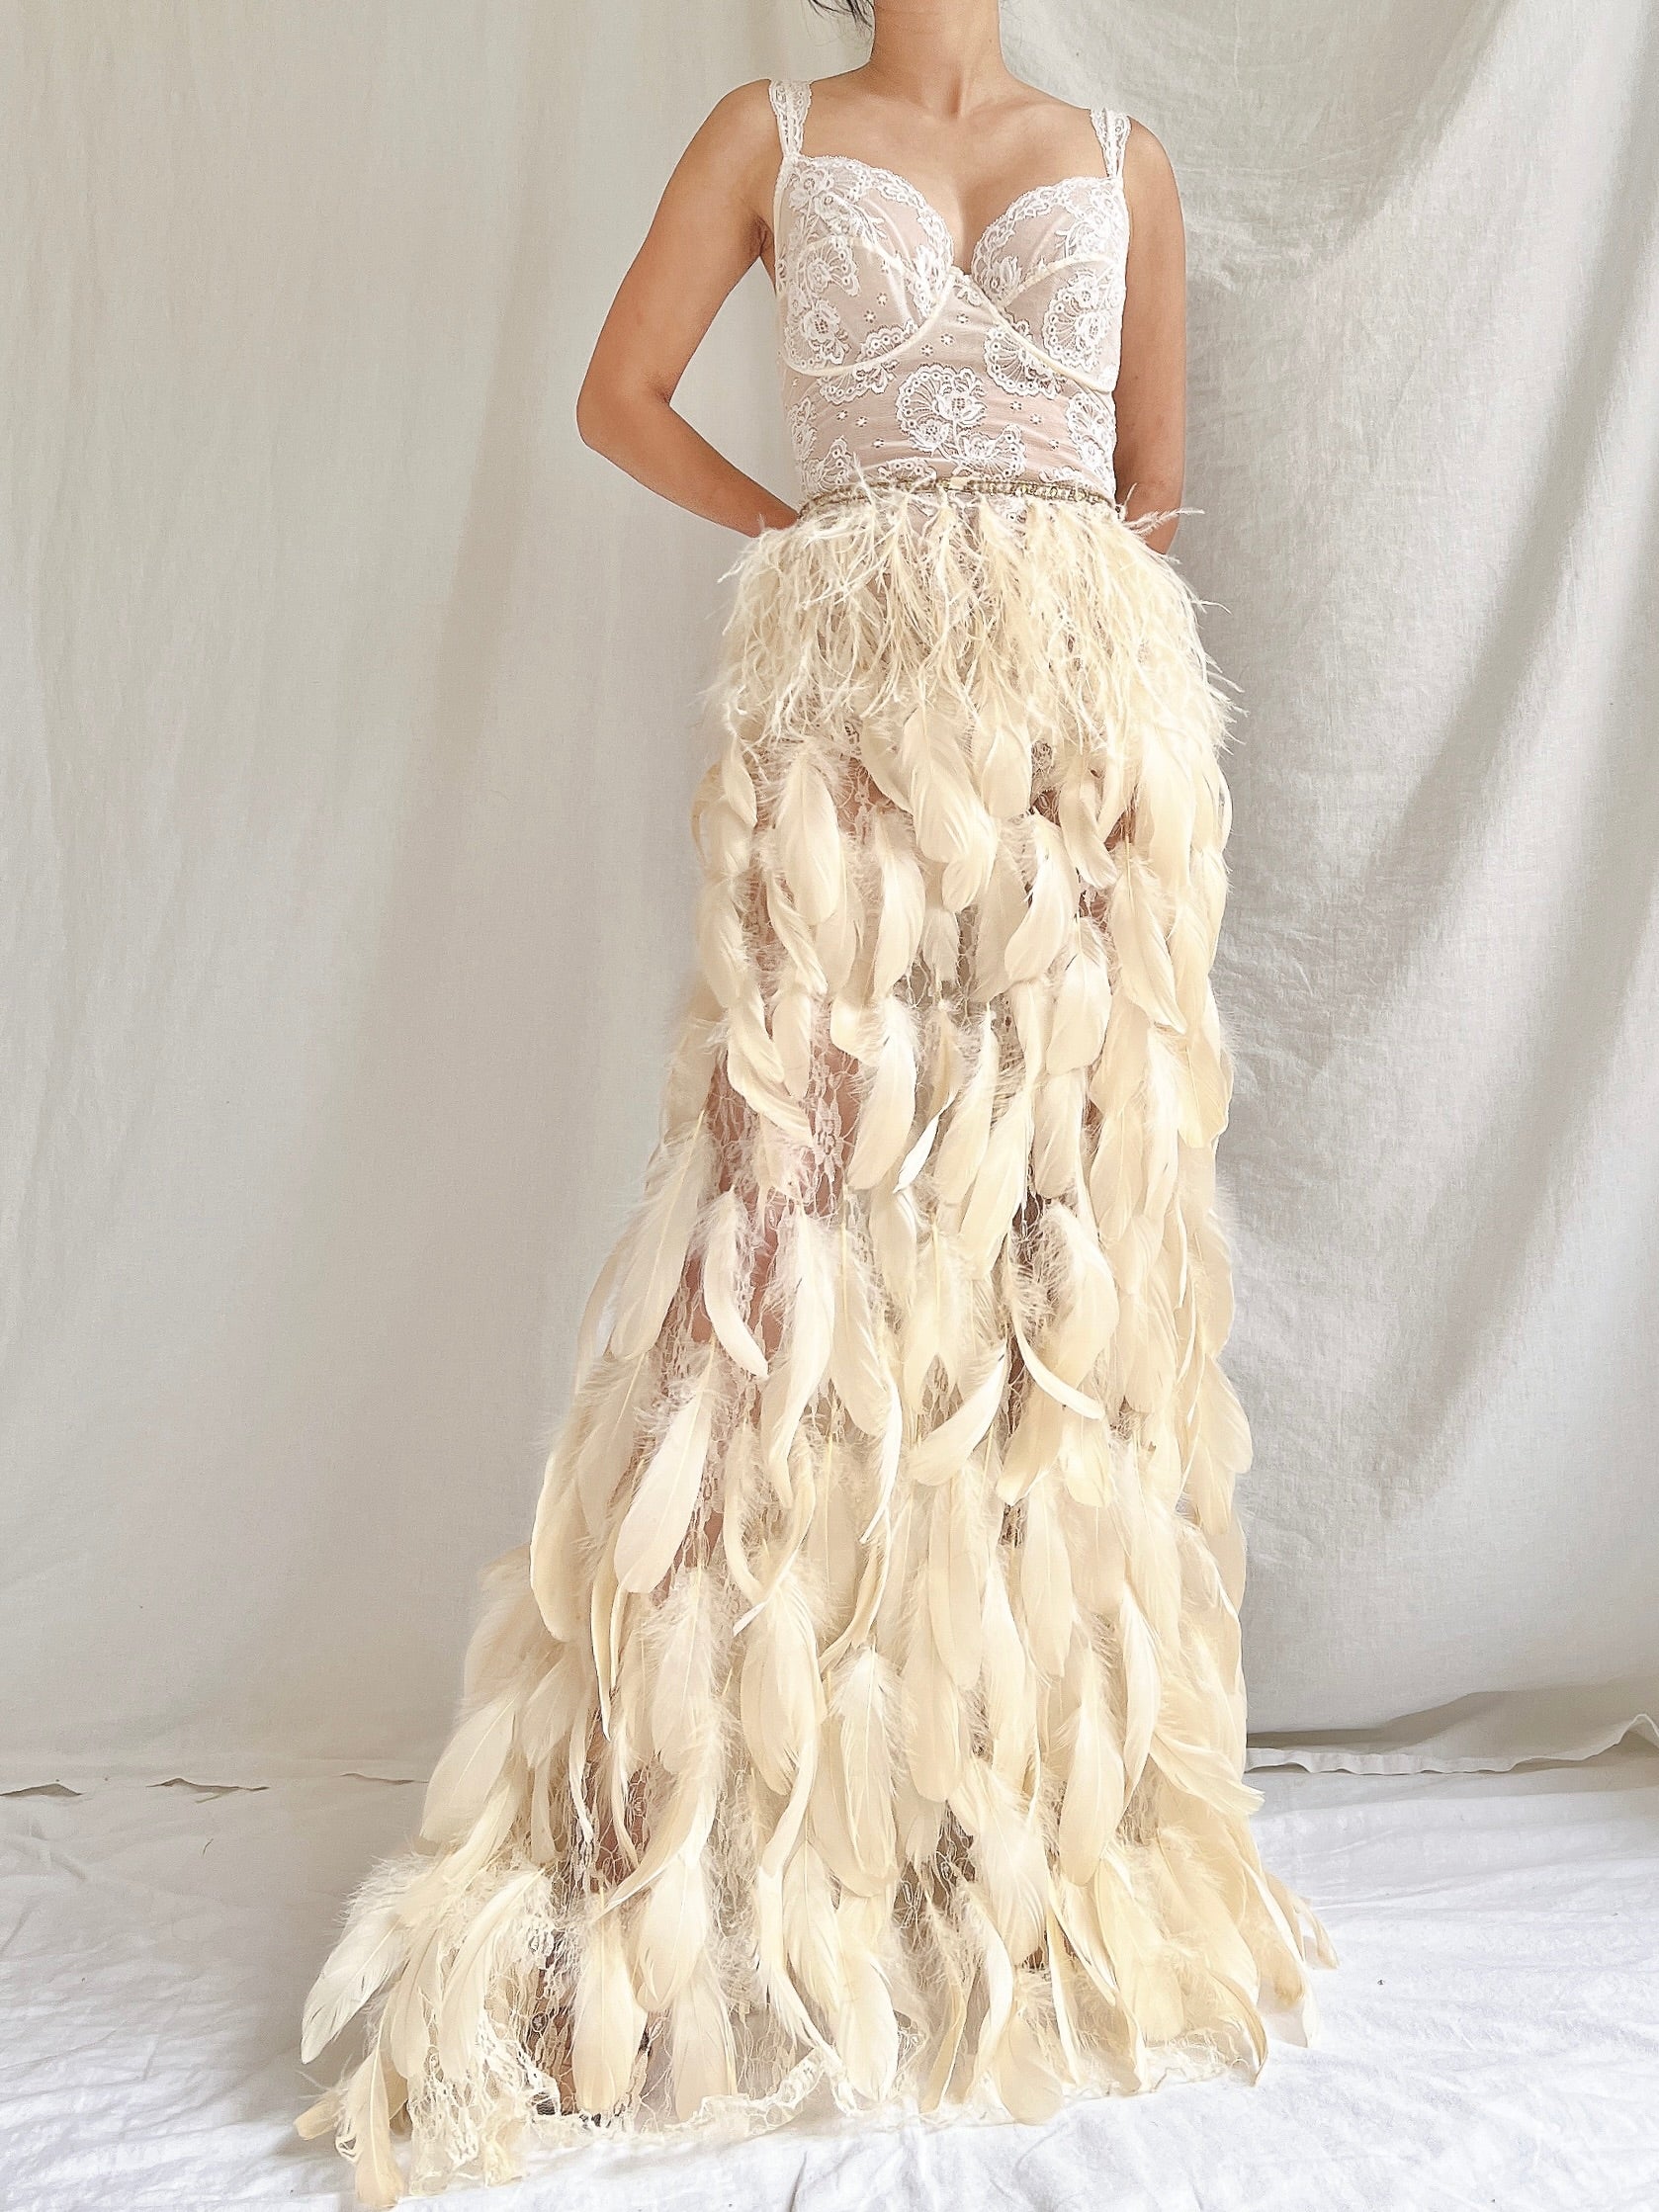 Vintage Buttercream Feather and Lace Skirt - S